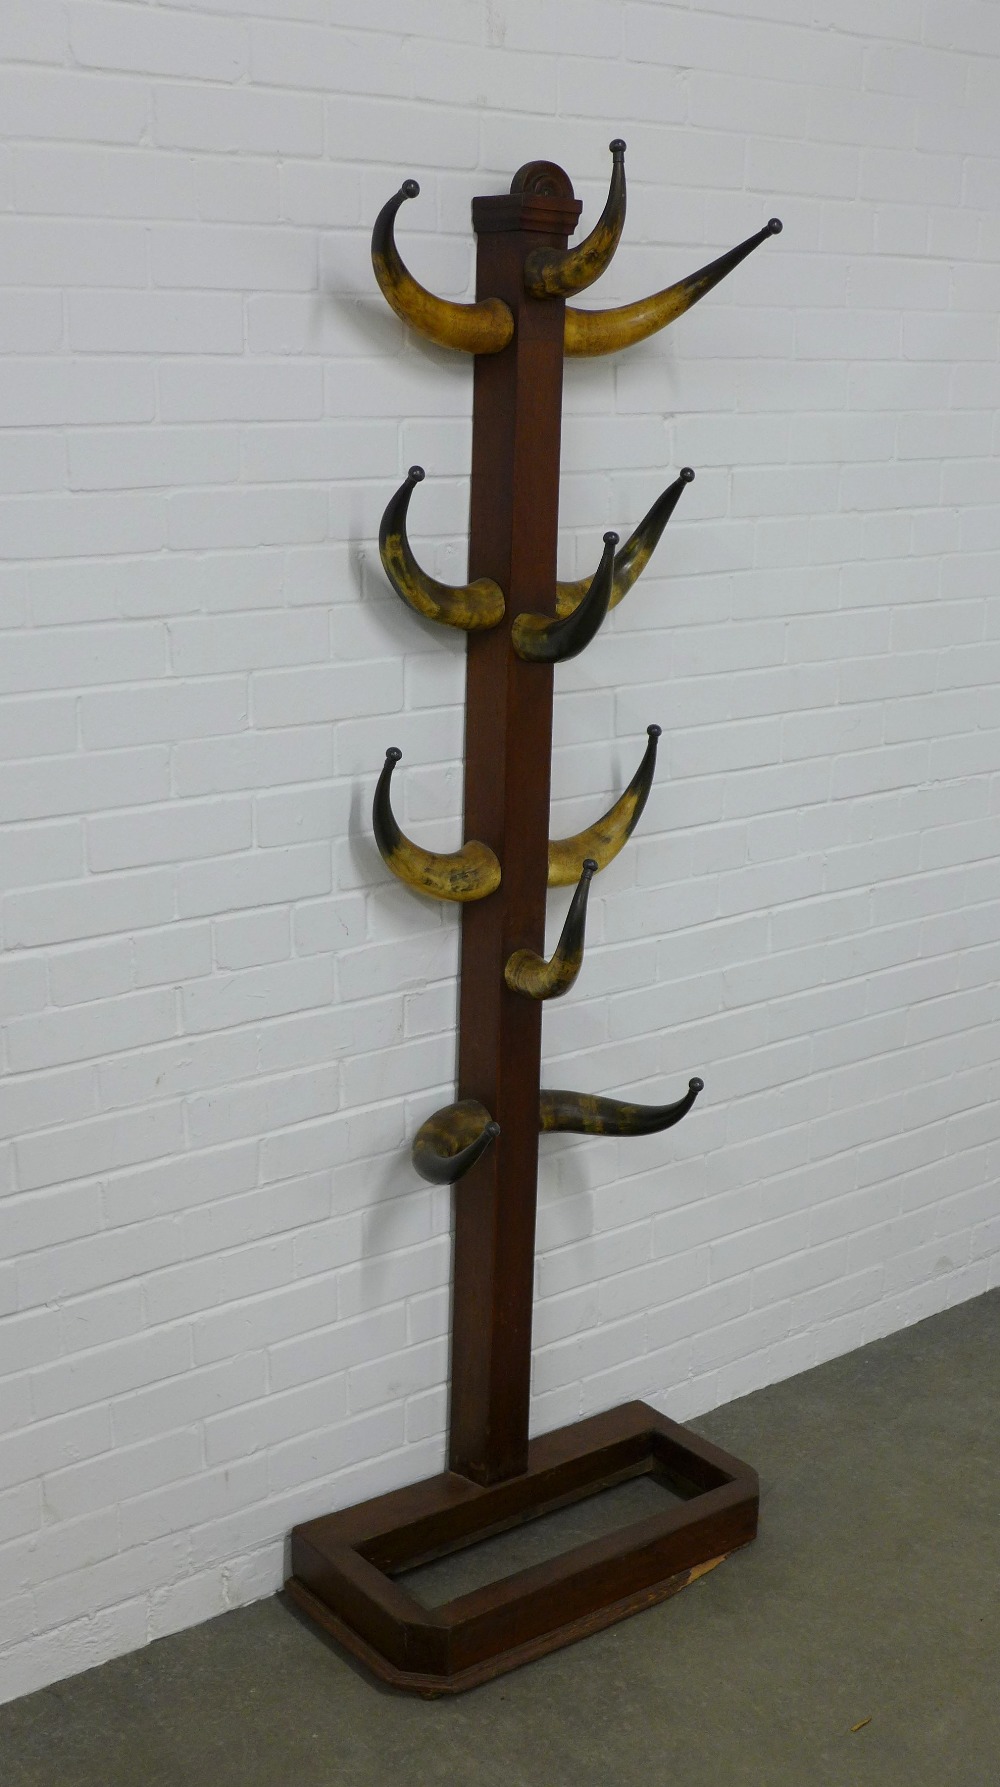 Late 19th / early 20th century cow horn hat and coat stand, 64 x 190cm. - Image 2 of 3